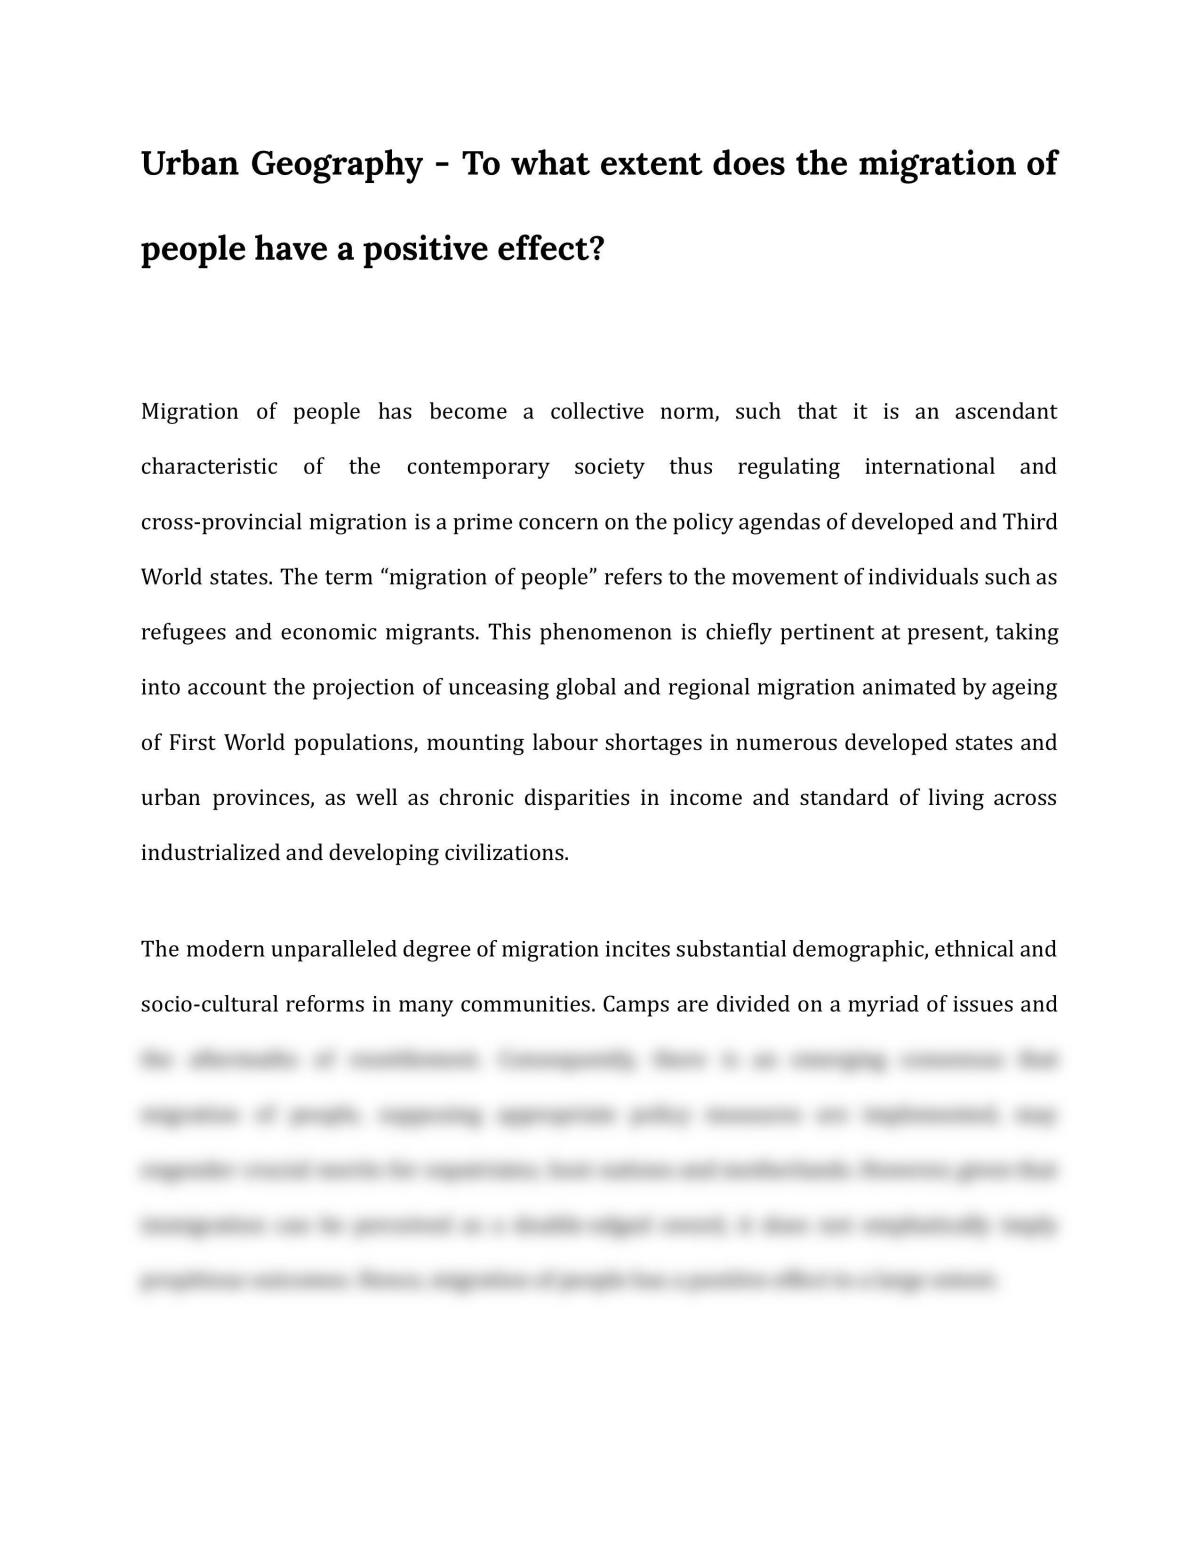 Urban geography - To what extent does the migration of people have a positive effect? - Page 1